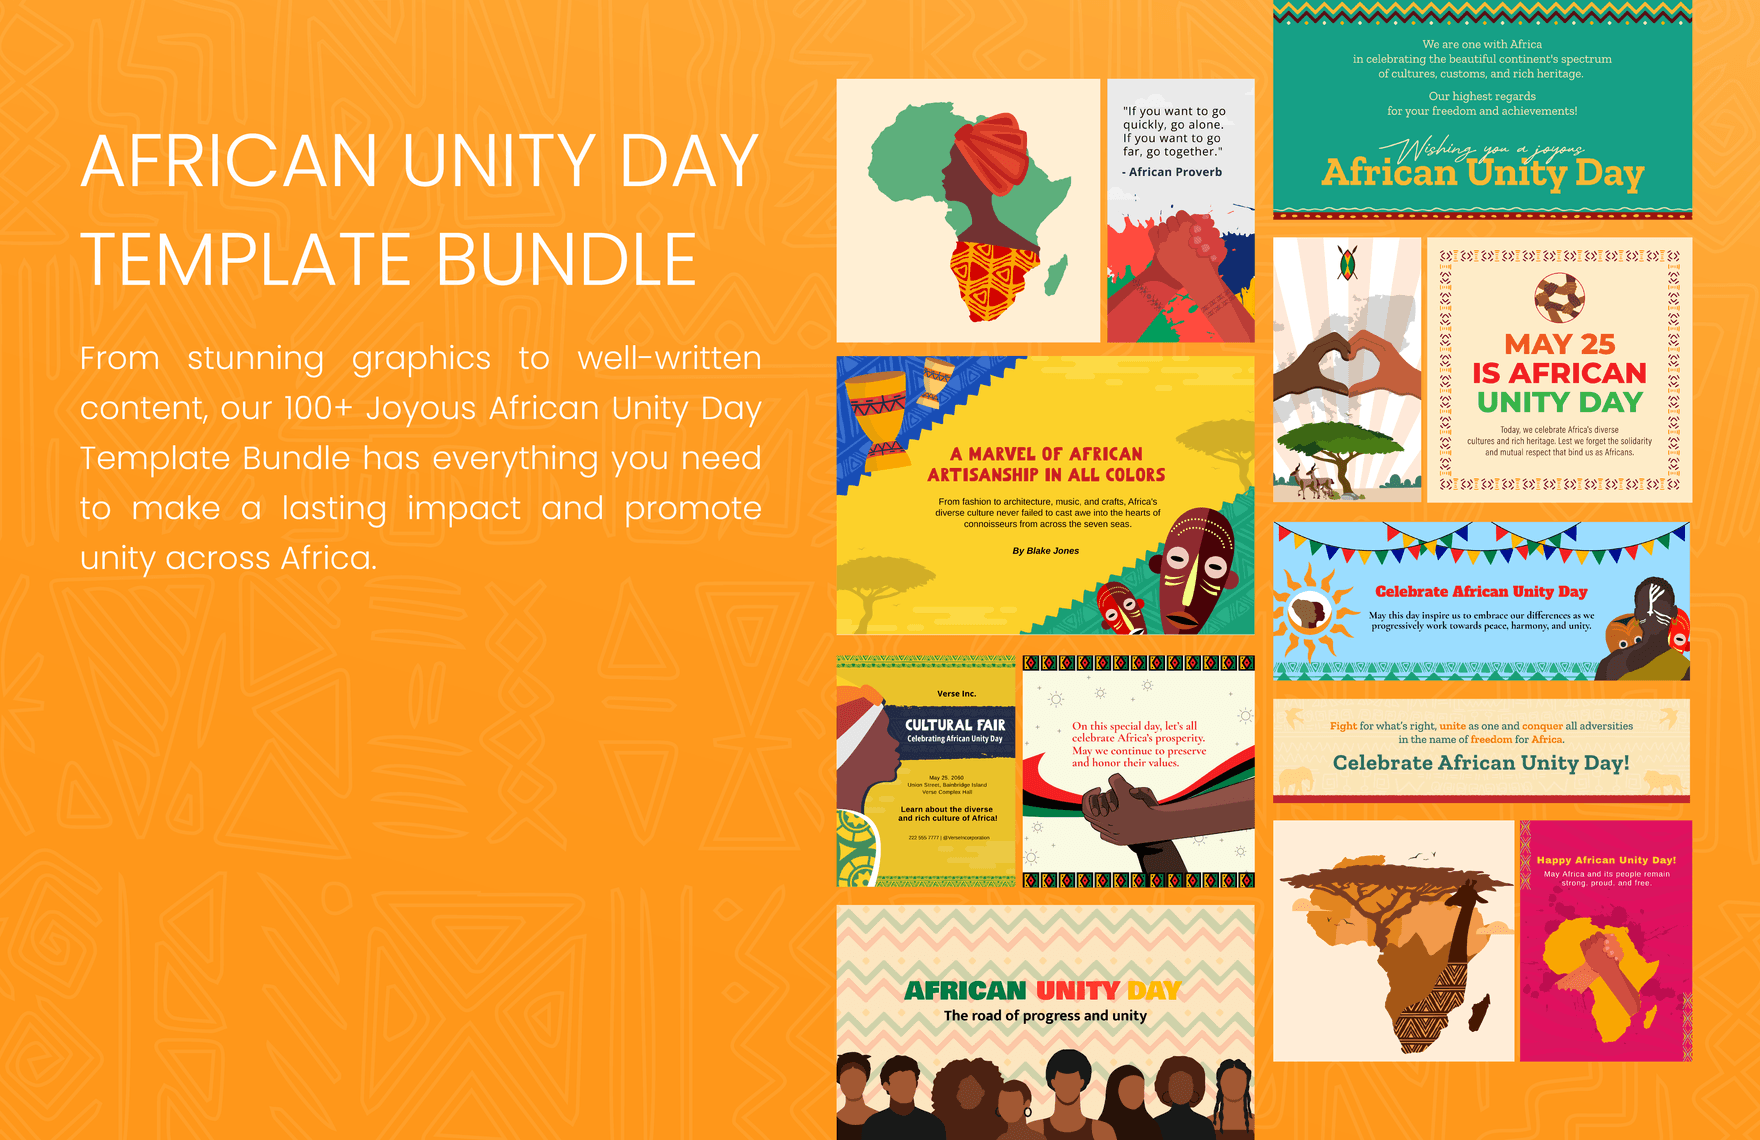 African Unity Day Background Template in Illustrator, Vector, Image